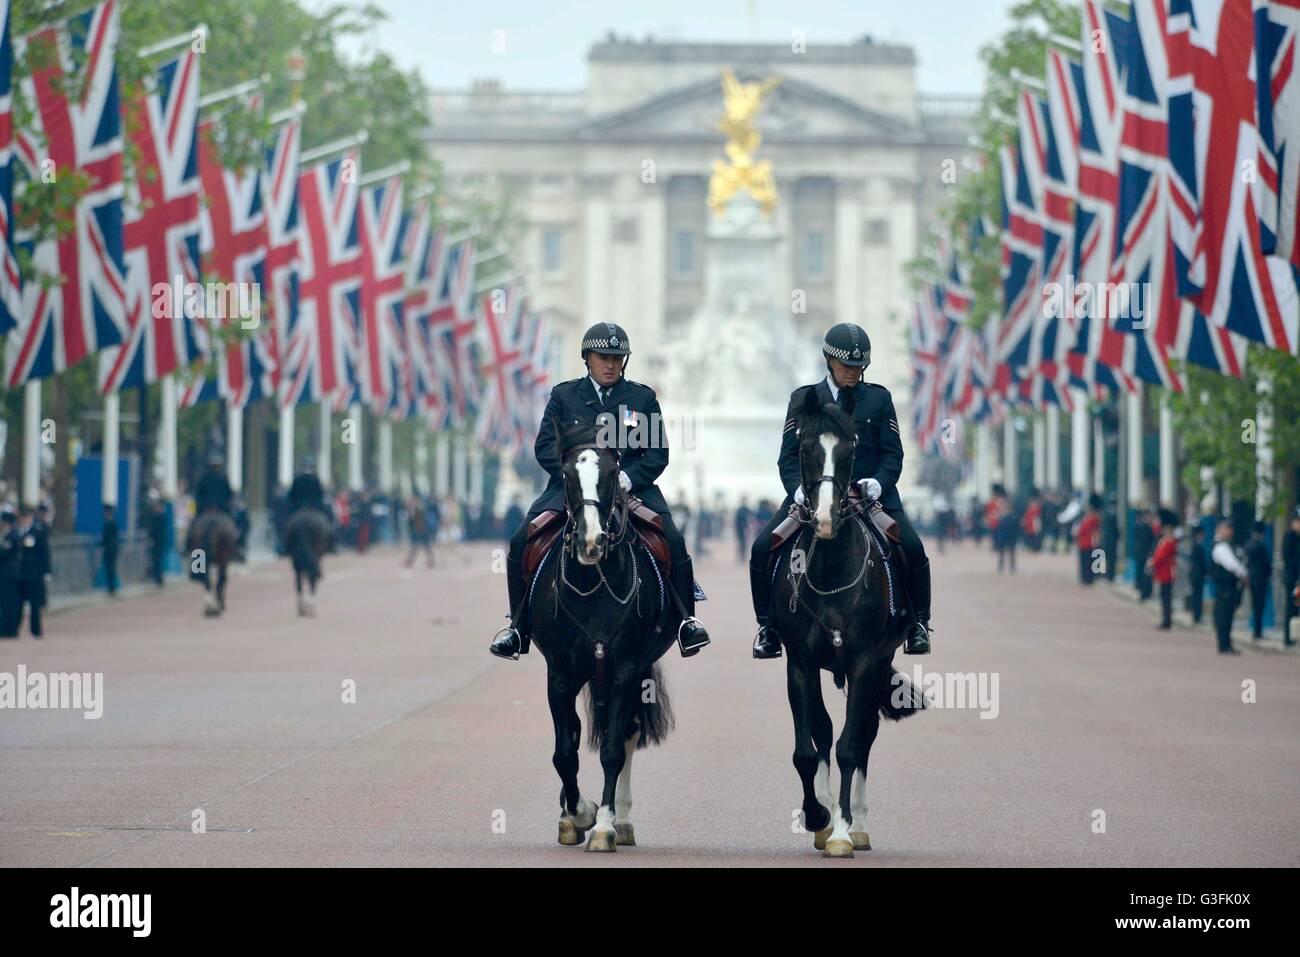 Police on the Mall at Trooping The Colour - The Queen's Birthday Parade. Stock Photo